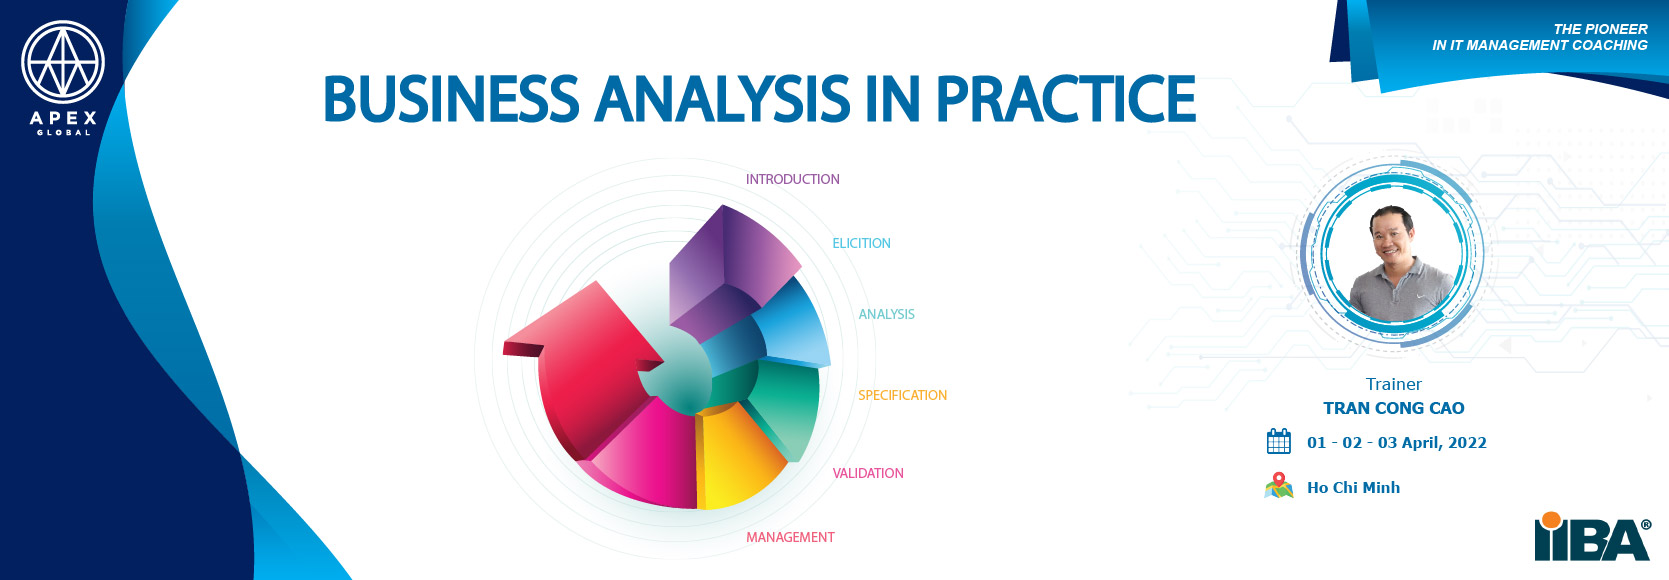 Business-Analysis-in-Practice-1